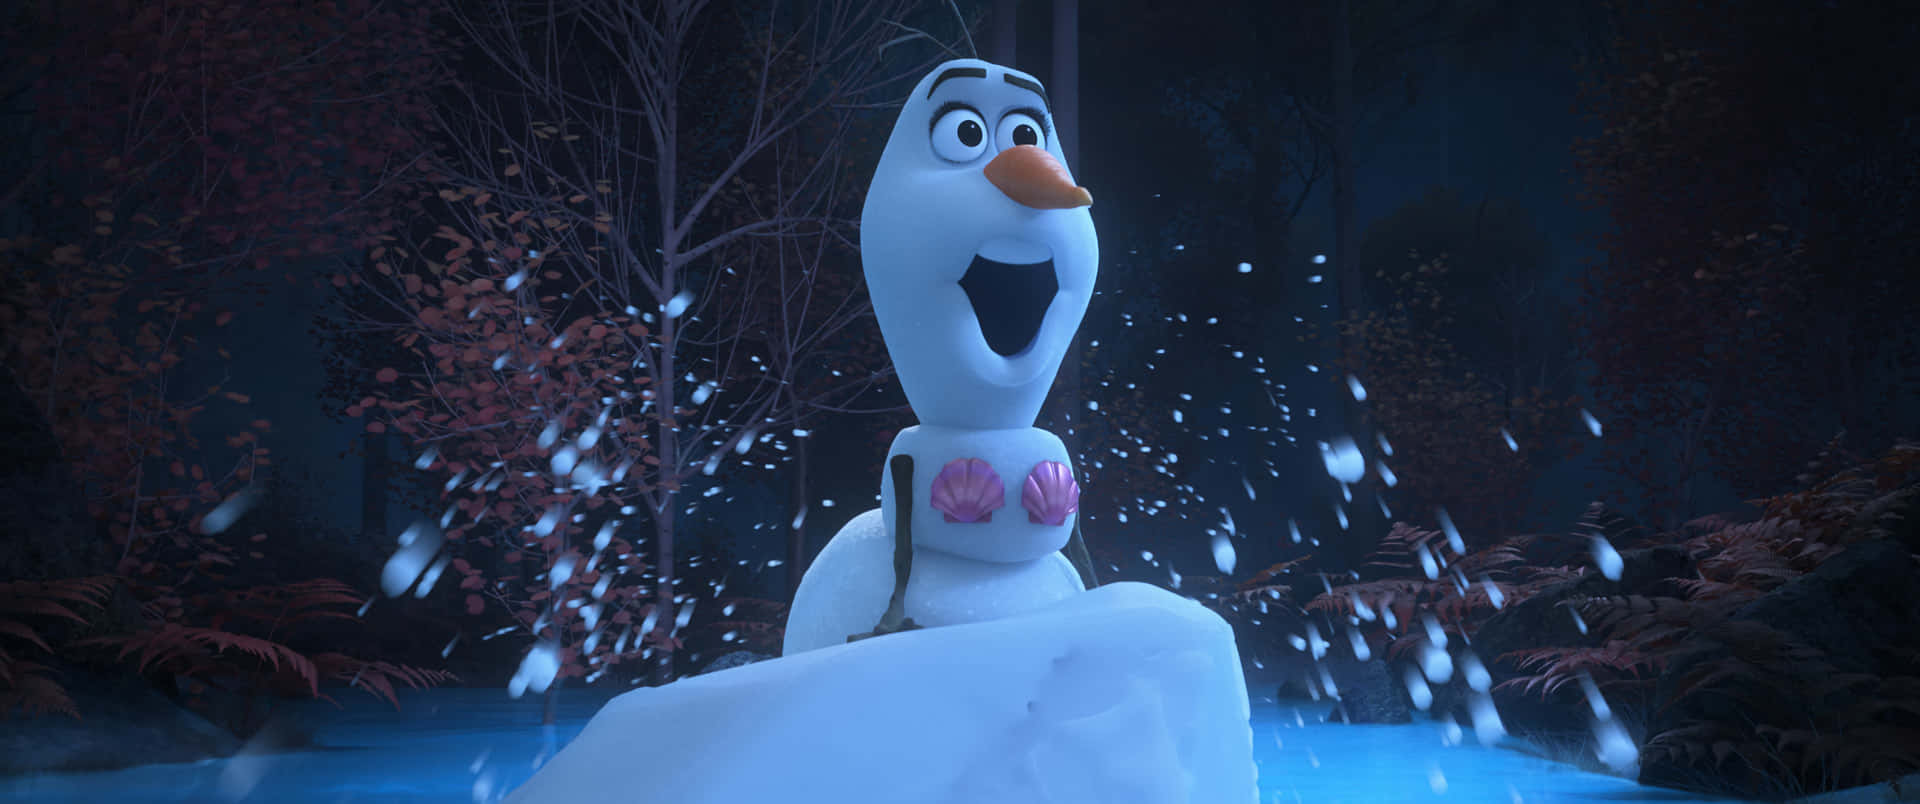 Enjoy Summer with this Cute Olaf! Wallpaper